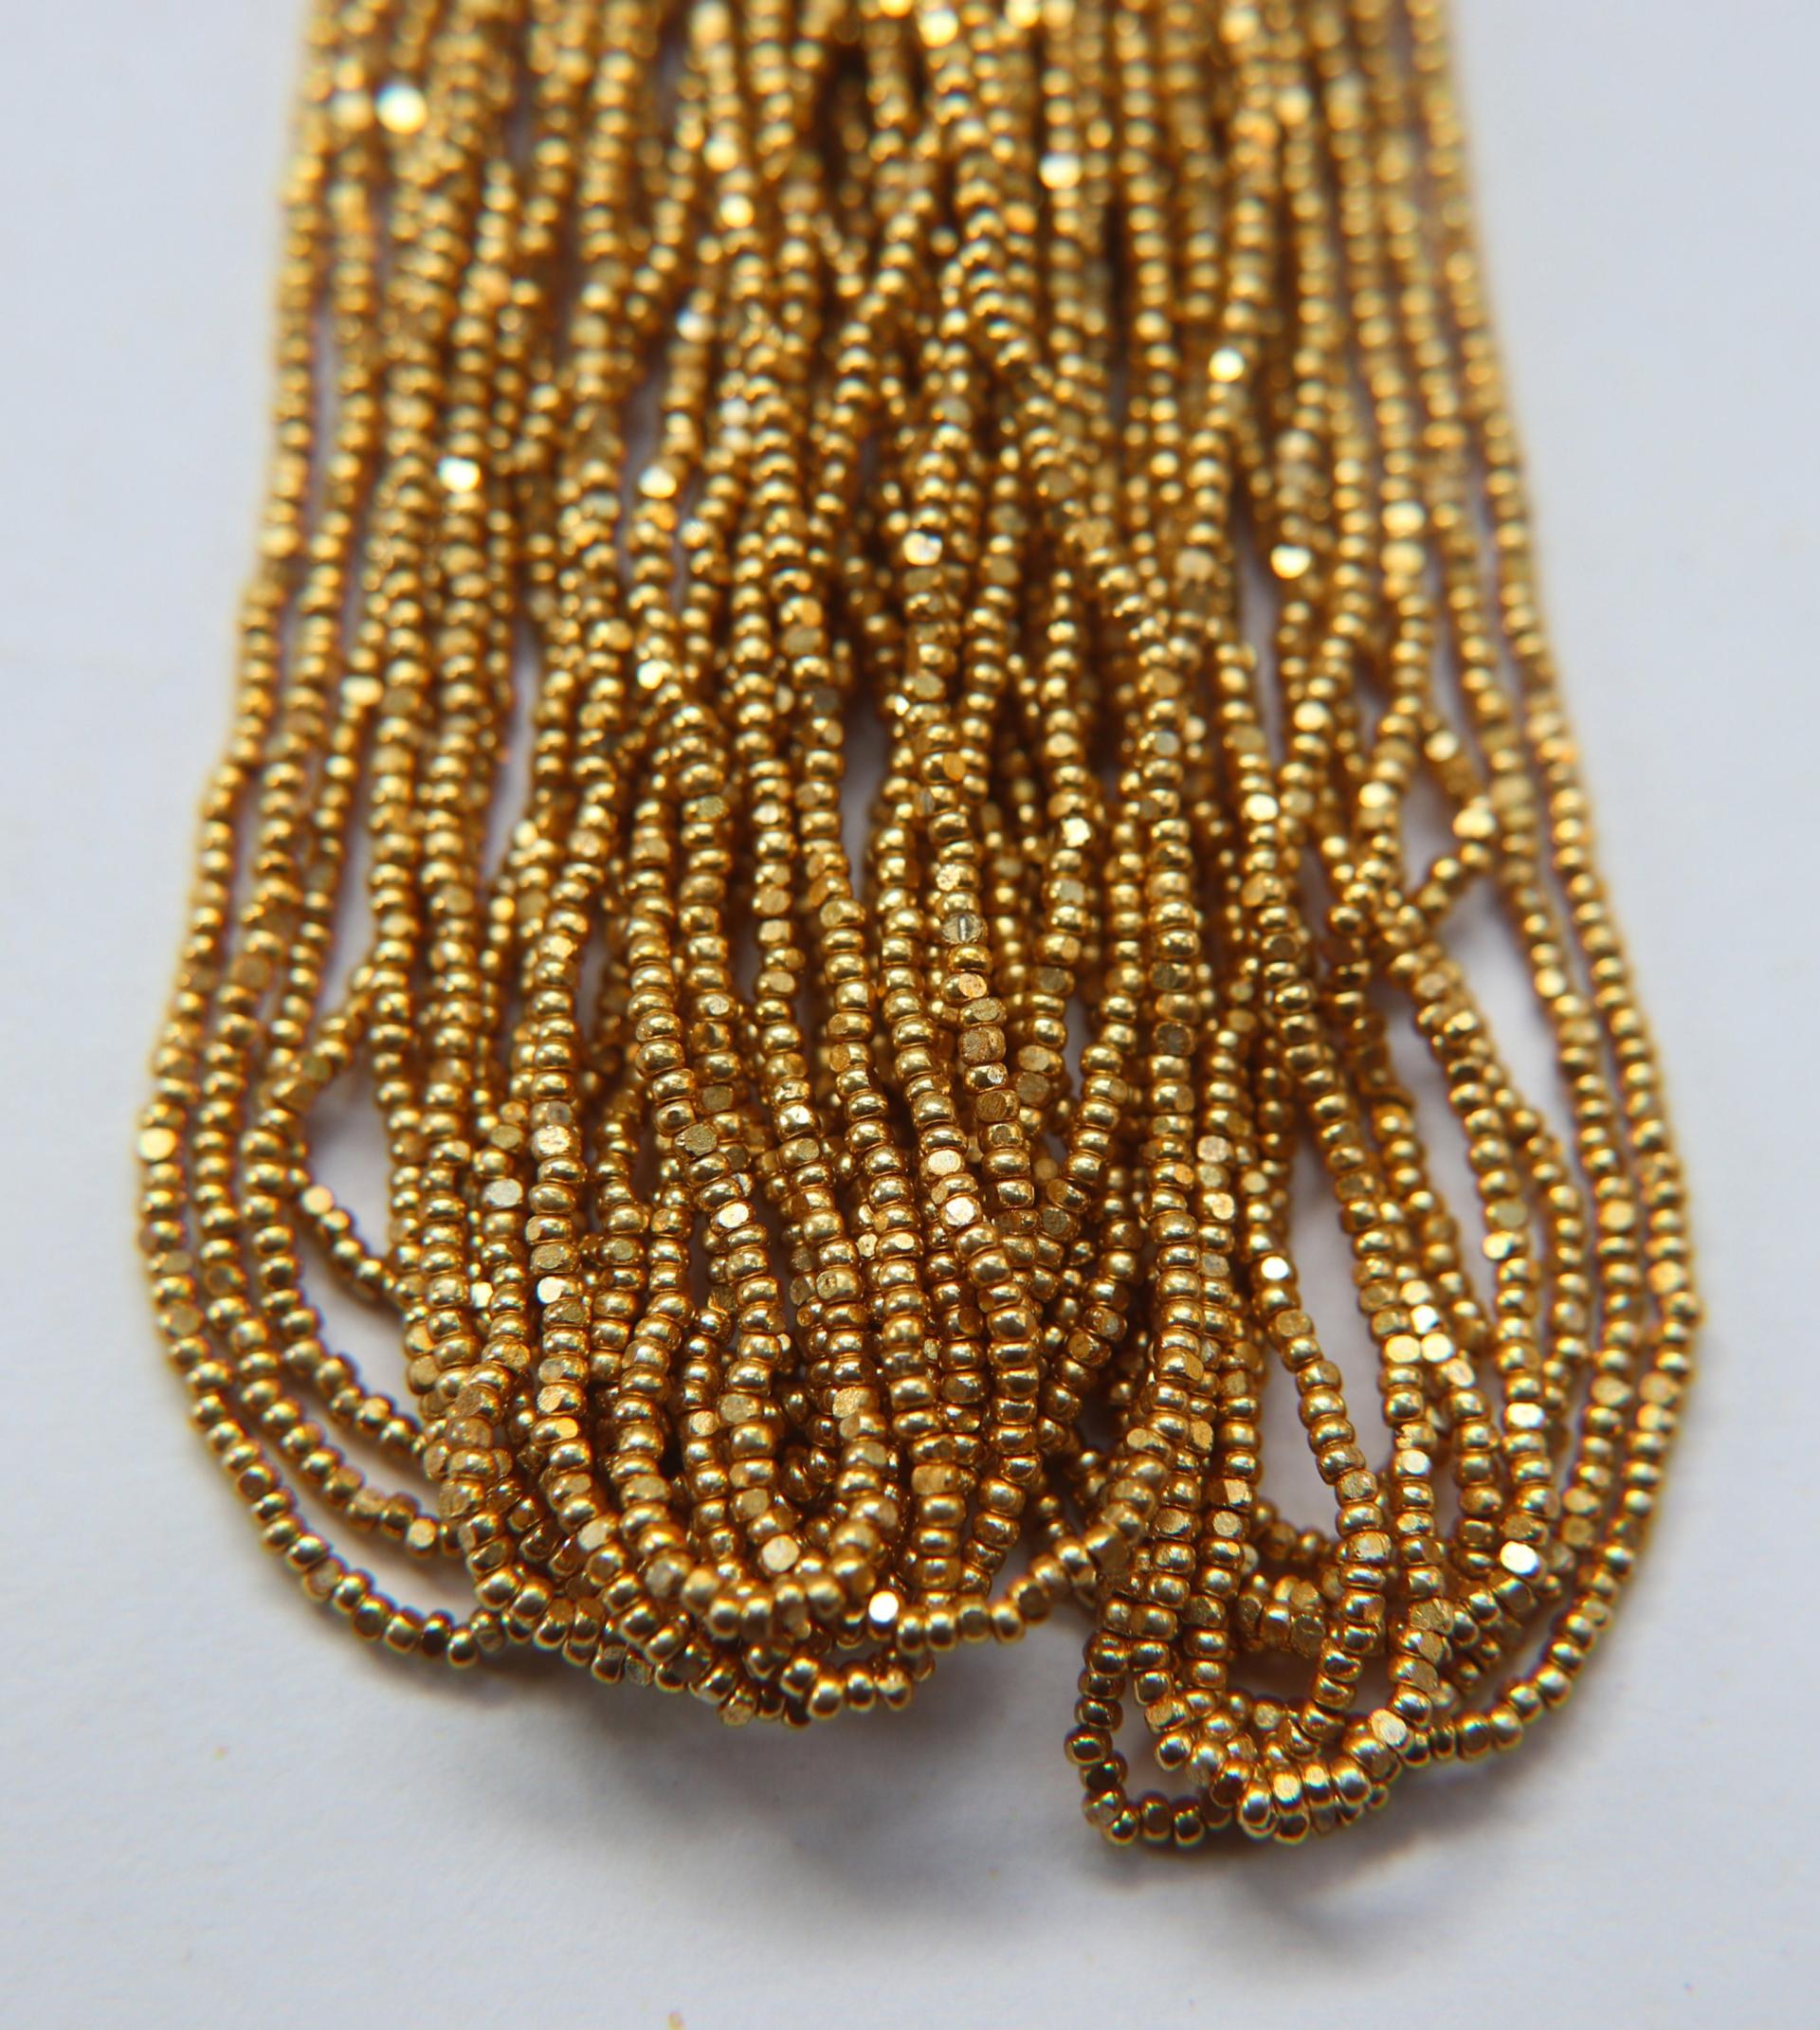 13/0 Charlotte Cut Beads Metallic Gold 5/10/20/50/250/500 Grams 1.6mm craft supplies, jewelry making, embroidery materials, vintage beads